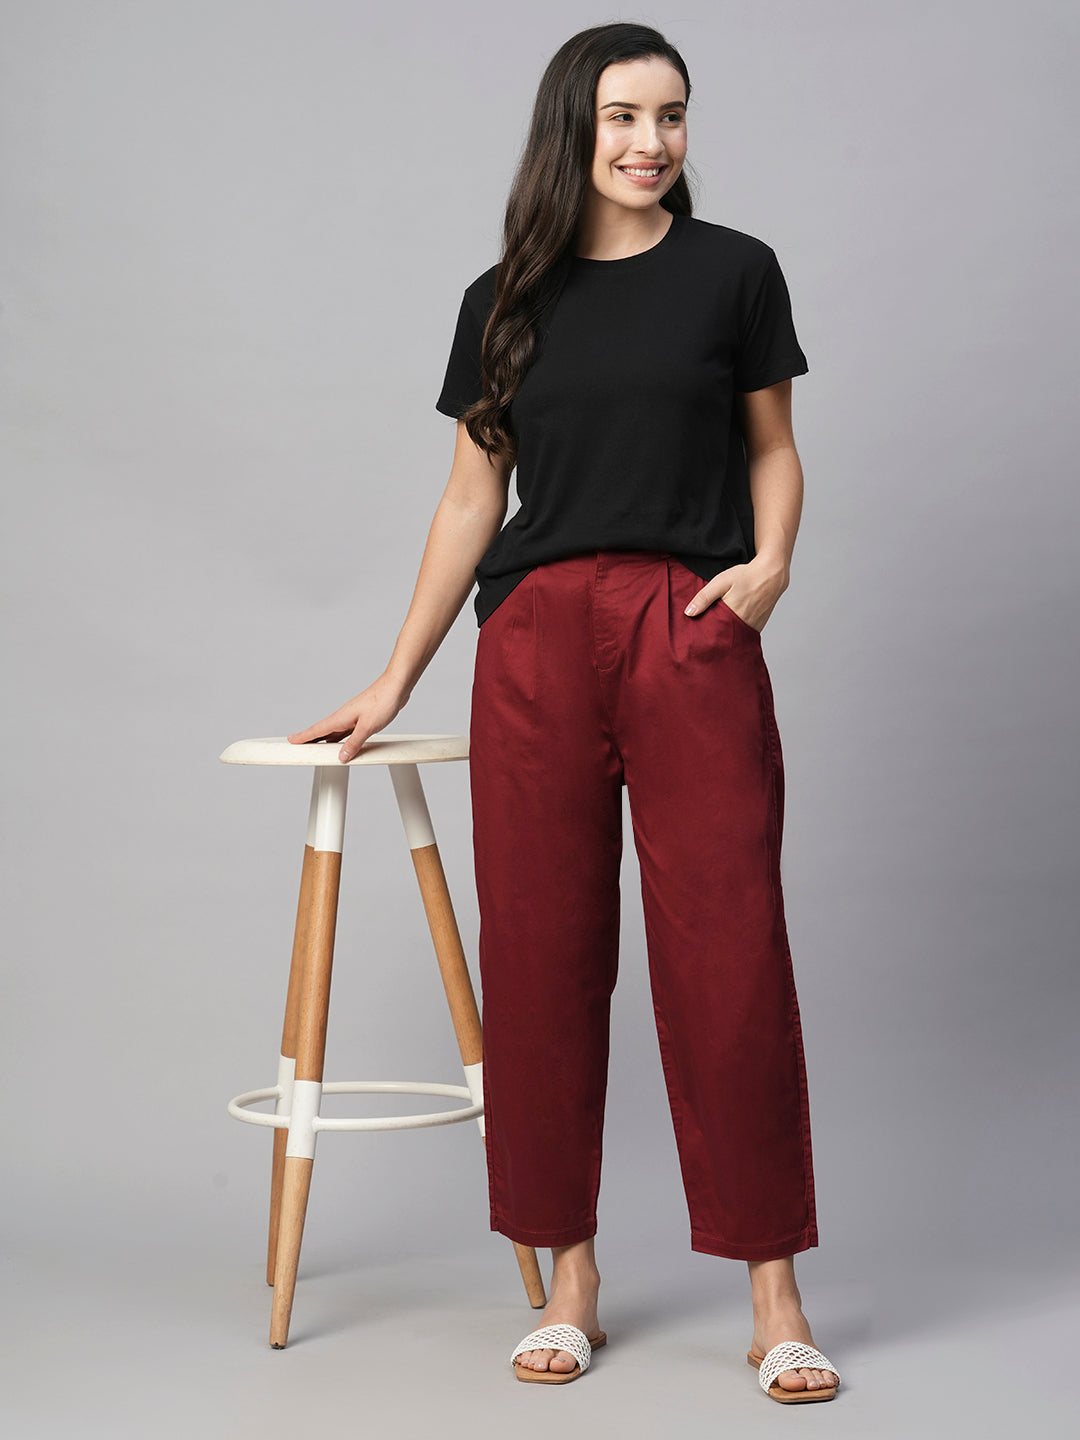 Women's Cotton Elastane Maroon/Red Loose Fit Pant